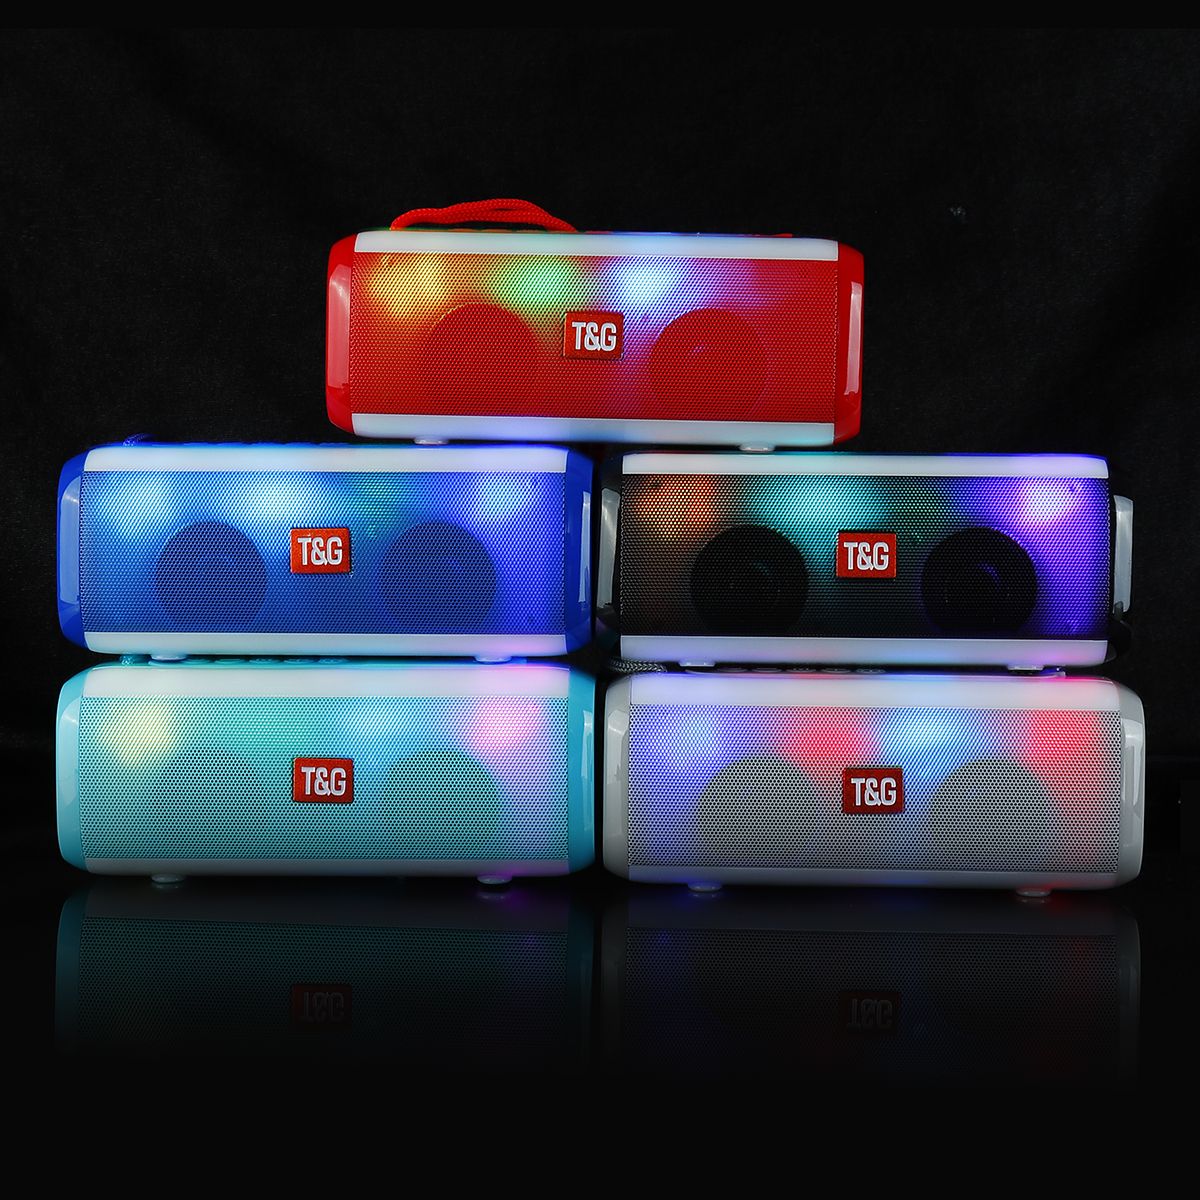 Portable-bluetooth-Wireless-Speaker-Dual-Drivers-FM-Radio-TF-Card-3D-Stereo-LED-Light-Subwoofer-with-1559047